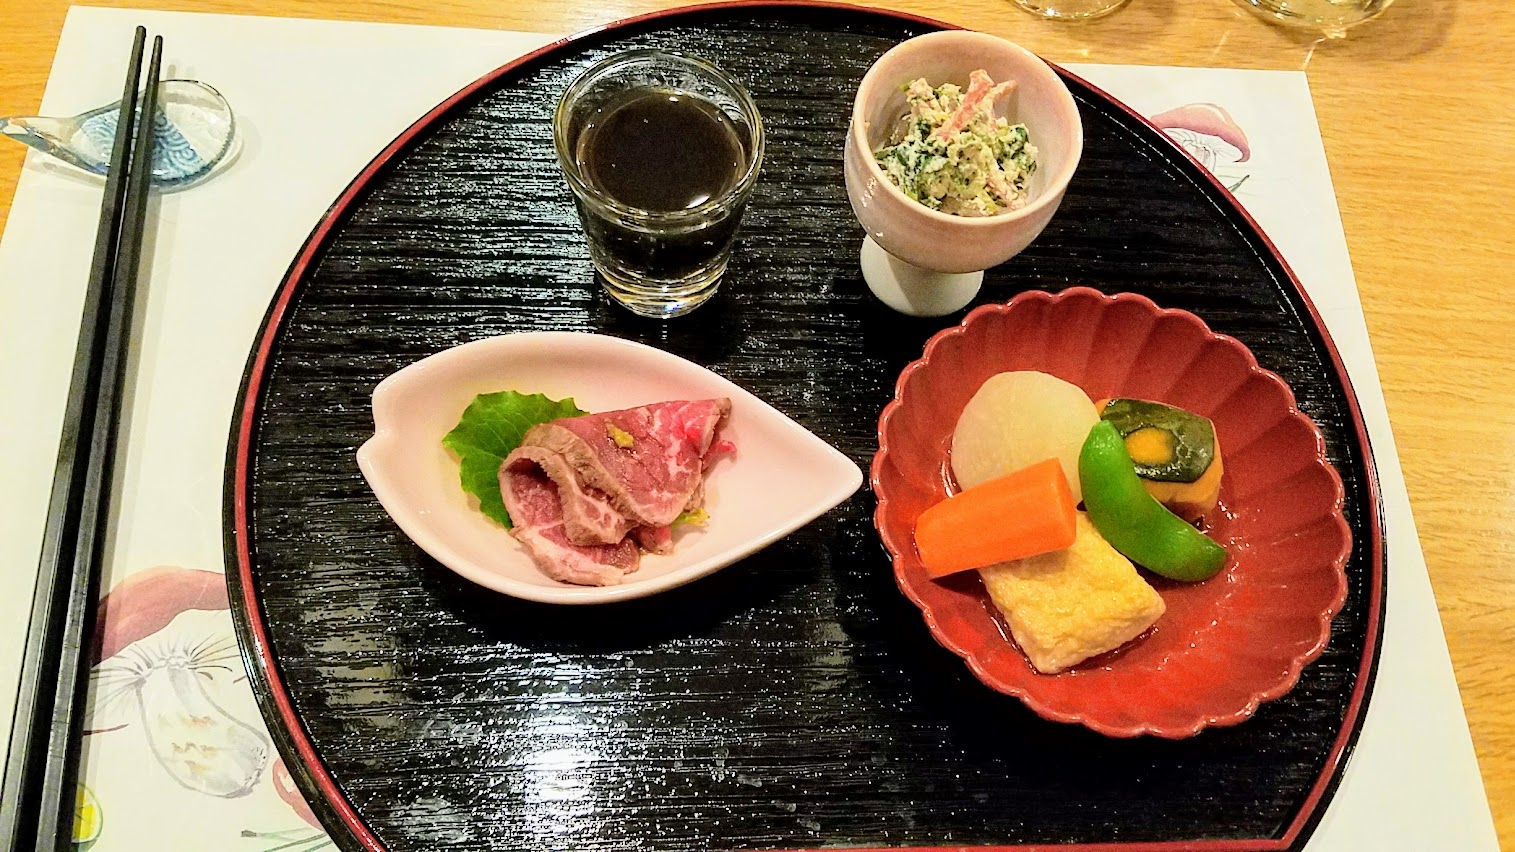 Dinner at Chef Naoko's Shizuku. I ordered the kaiseki, six courses that includes a catch of the day wild sashimi cousre and choice of main dish with rice and miso soup. This is from the second course, which offered four small side dishes height=